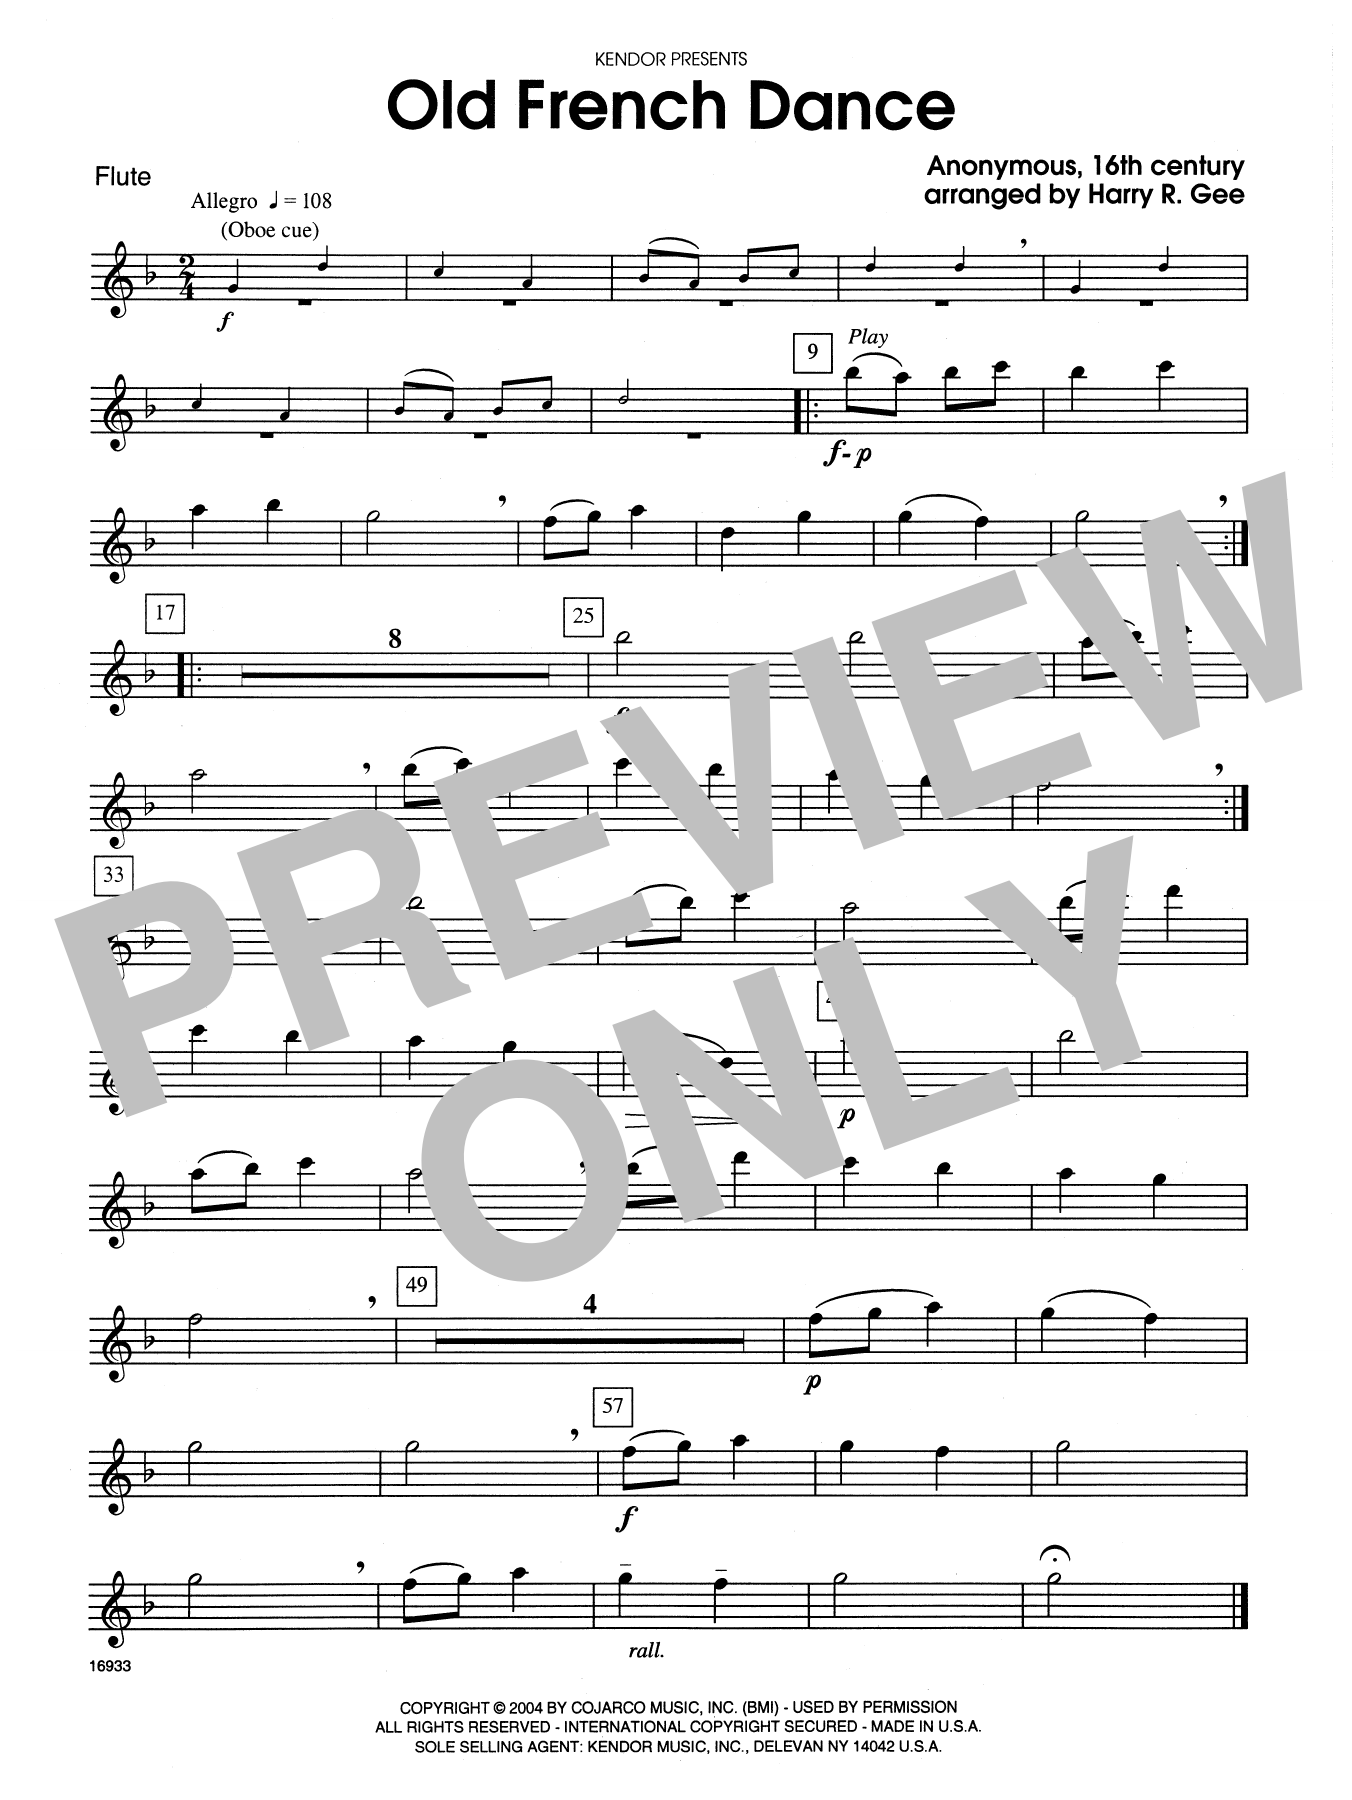 Download Harry R. Gee Old French Dance - Flute Sheet Music